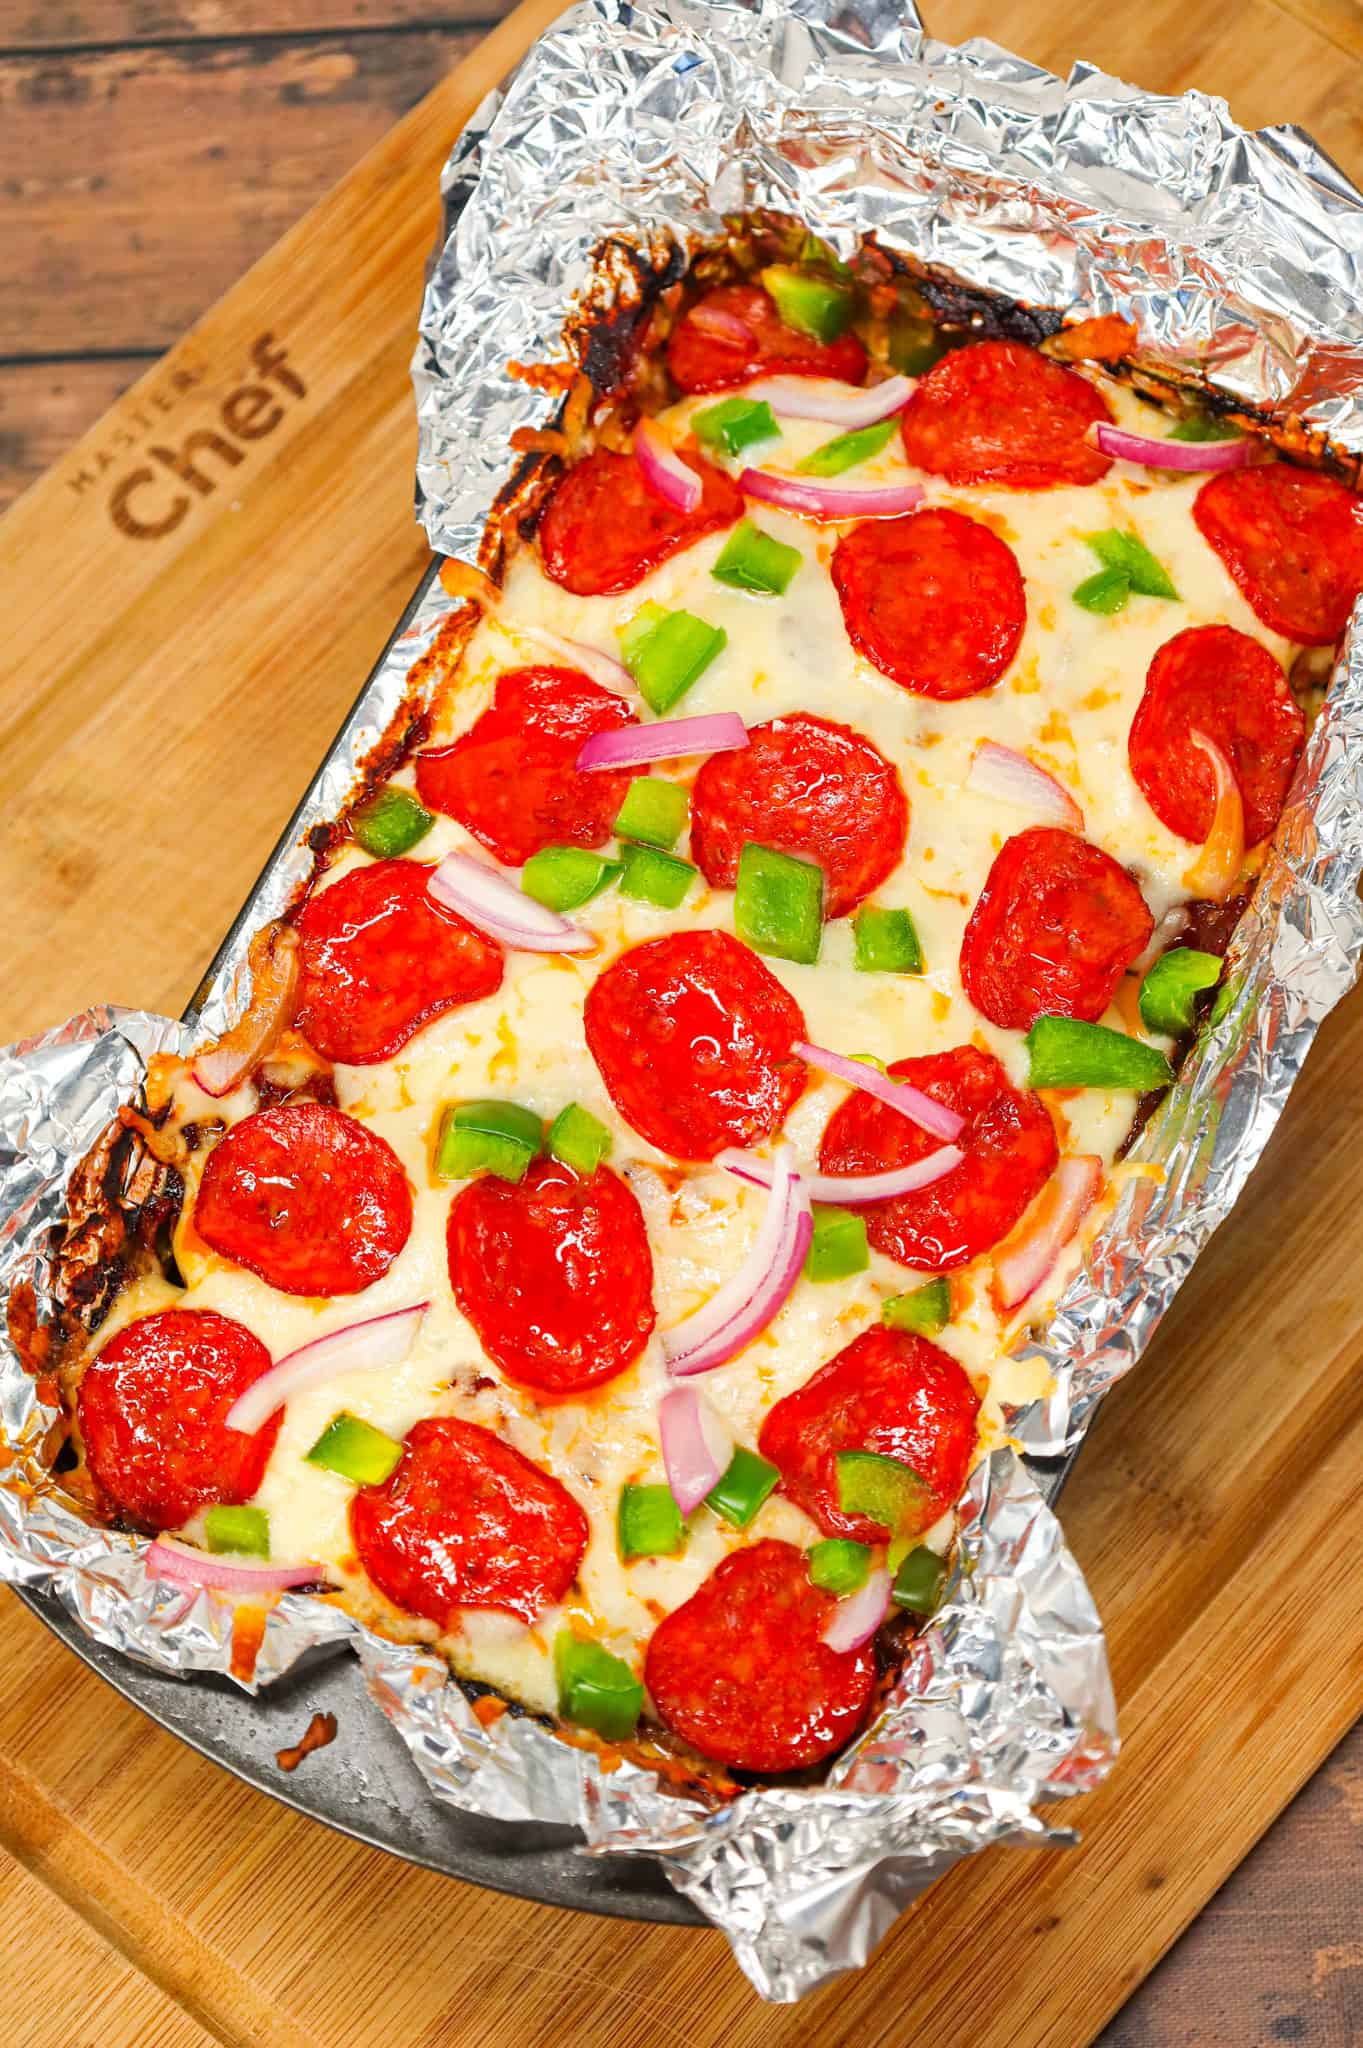 Pizza Meatloaf is a delicious ground beef meatloaf loaded with mozzarella cheese, pizza sauce, pepperoni slices, diced green peppers and red onions.